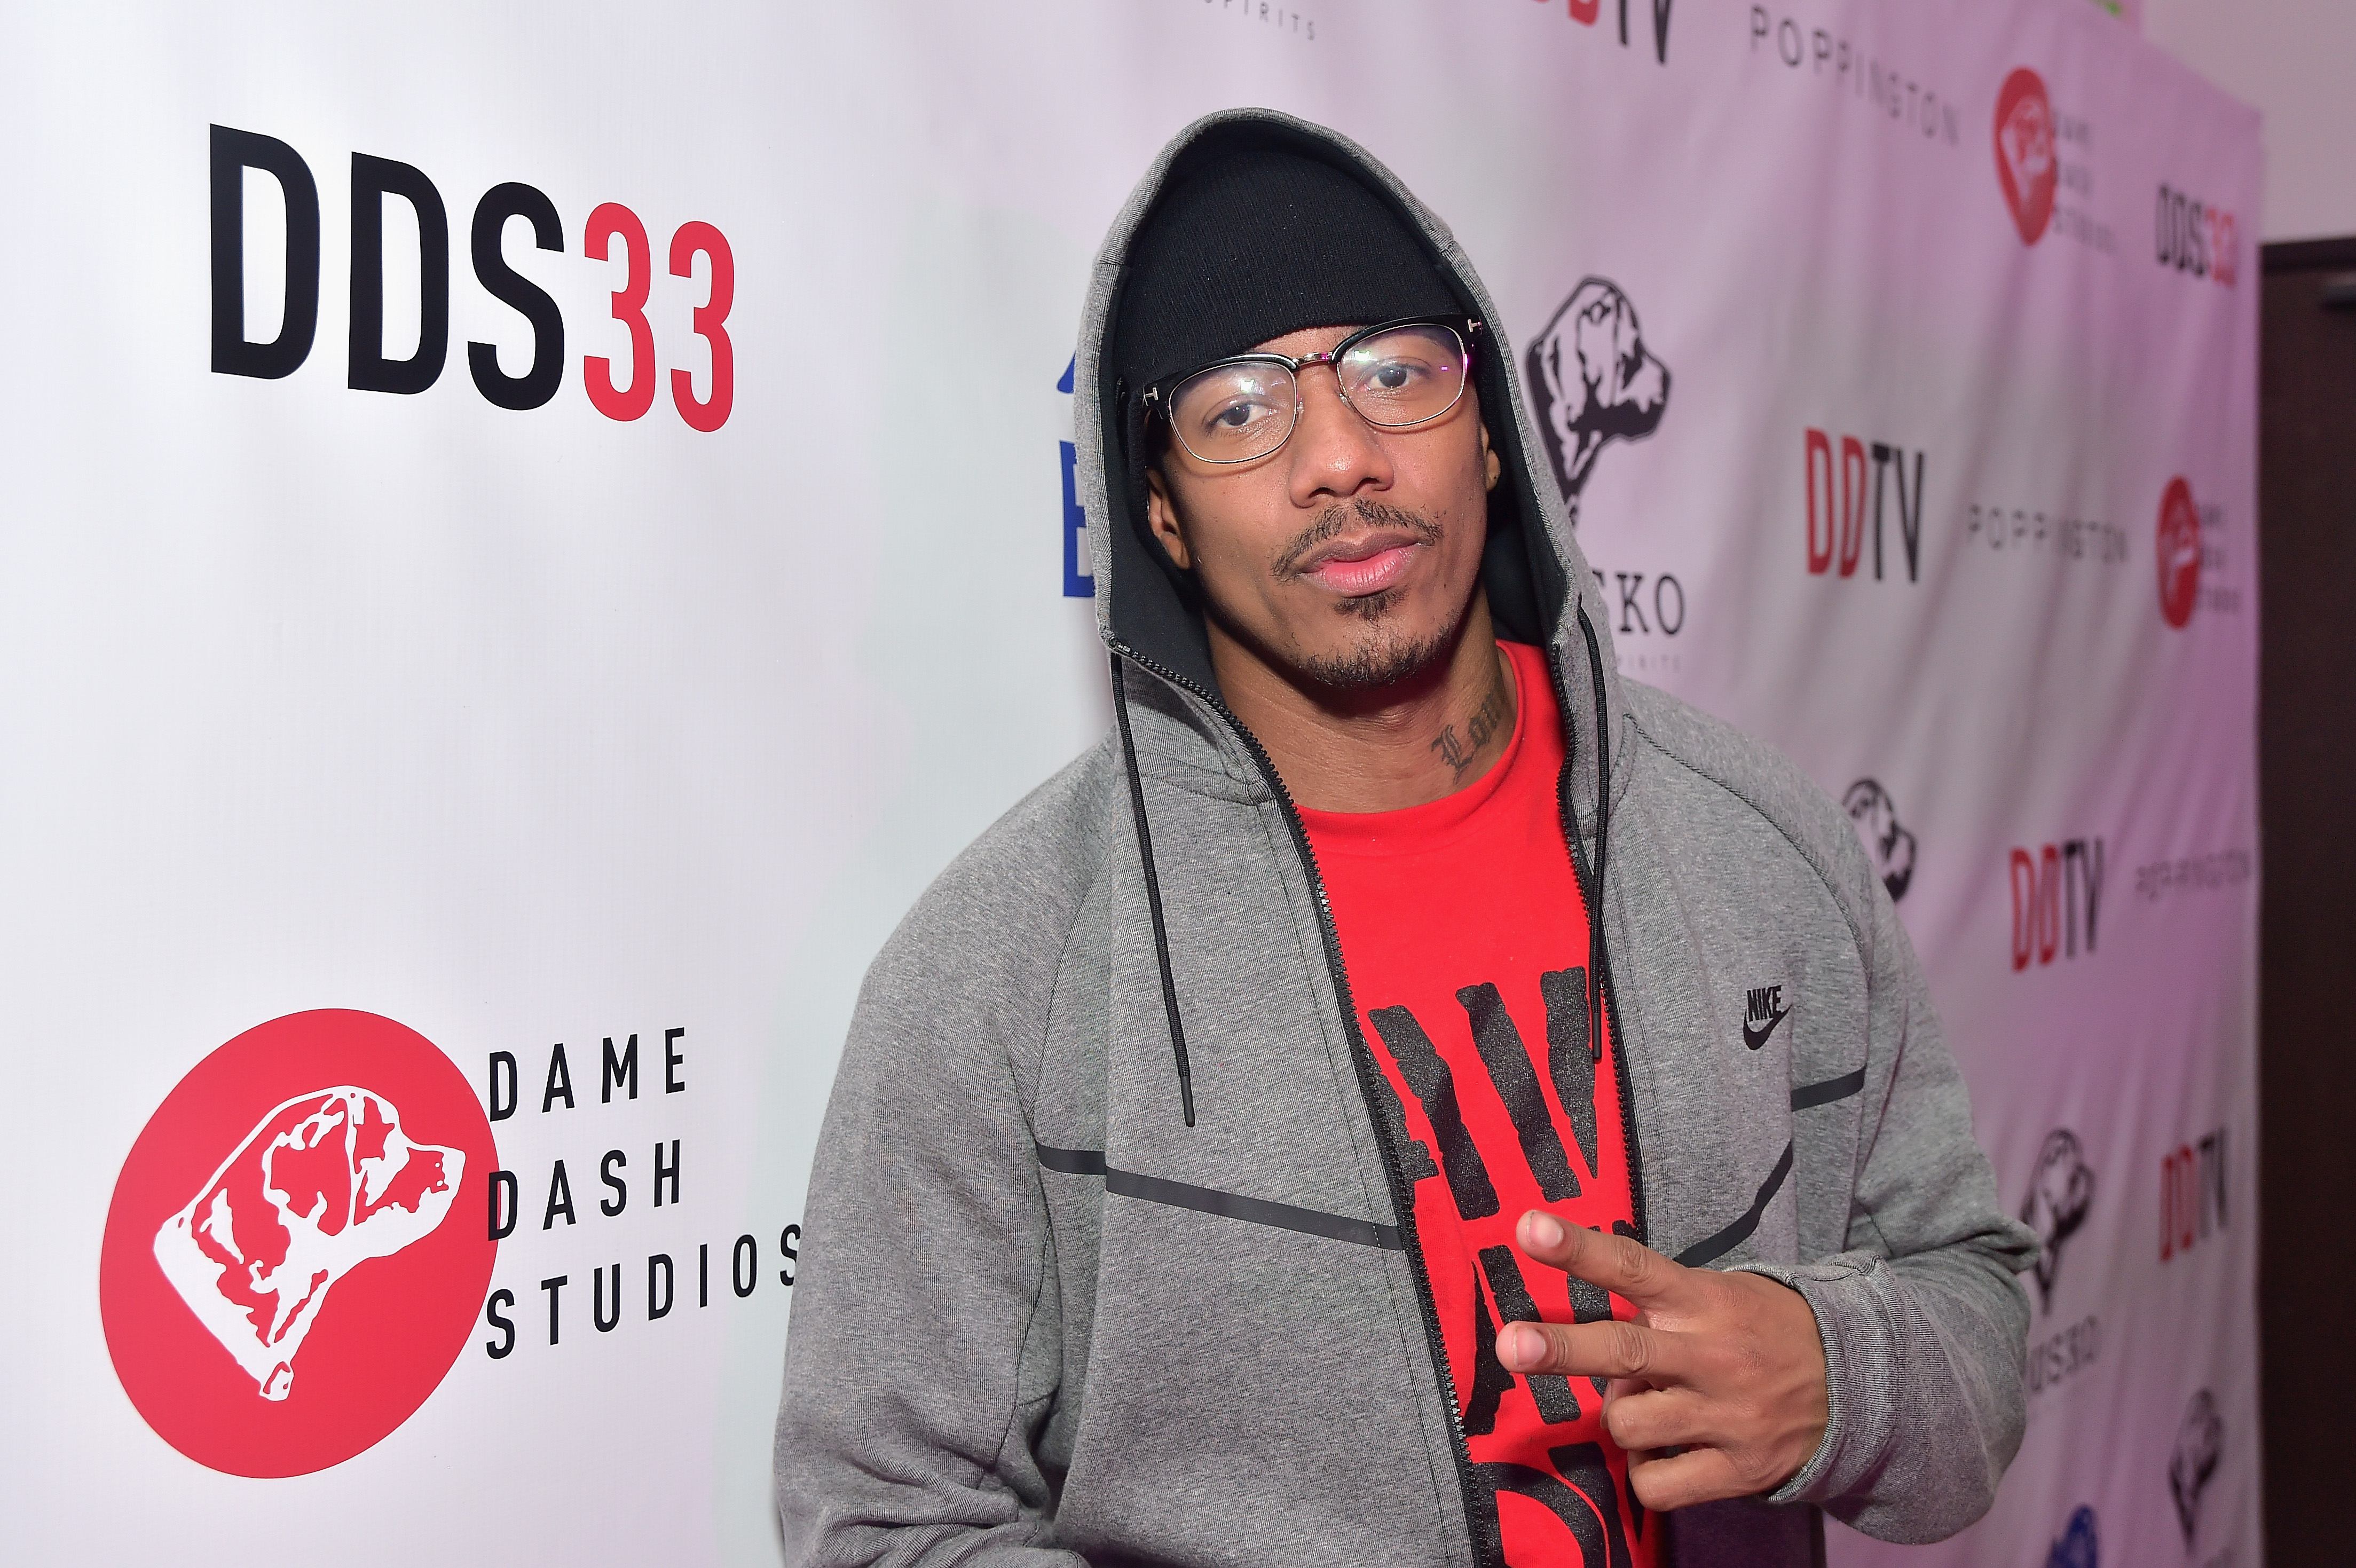 Nick Cannon Admits He Mixed Up Mother’s Day Cards: “I Tried My Best”